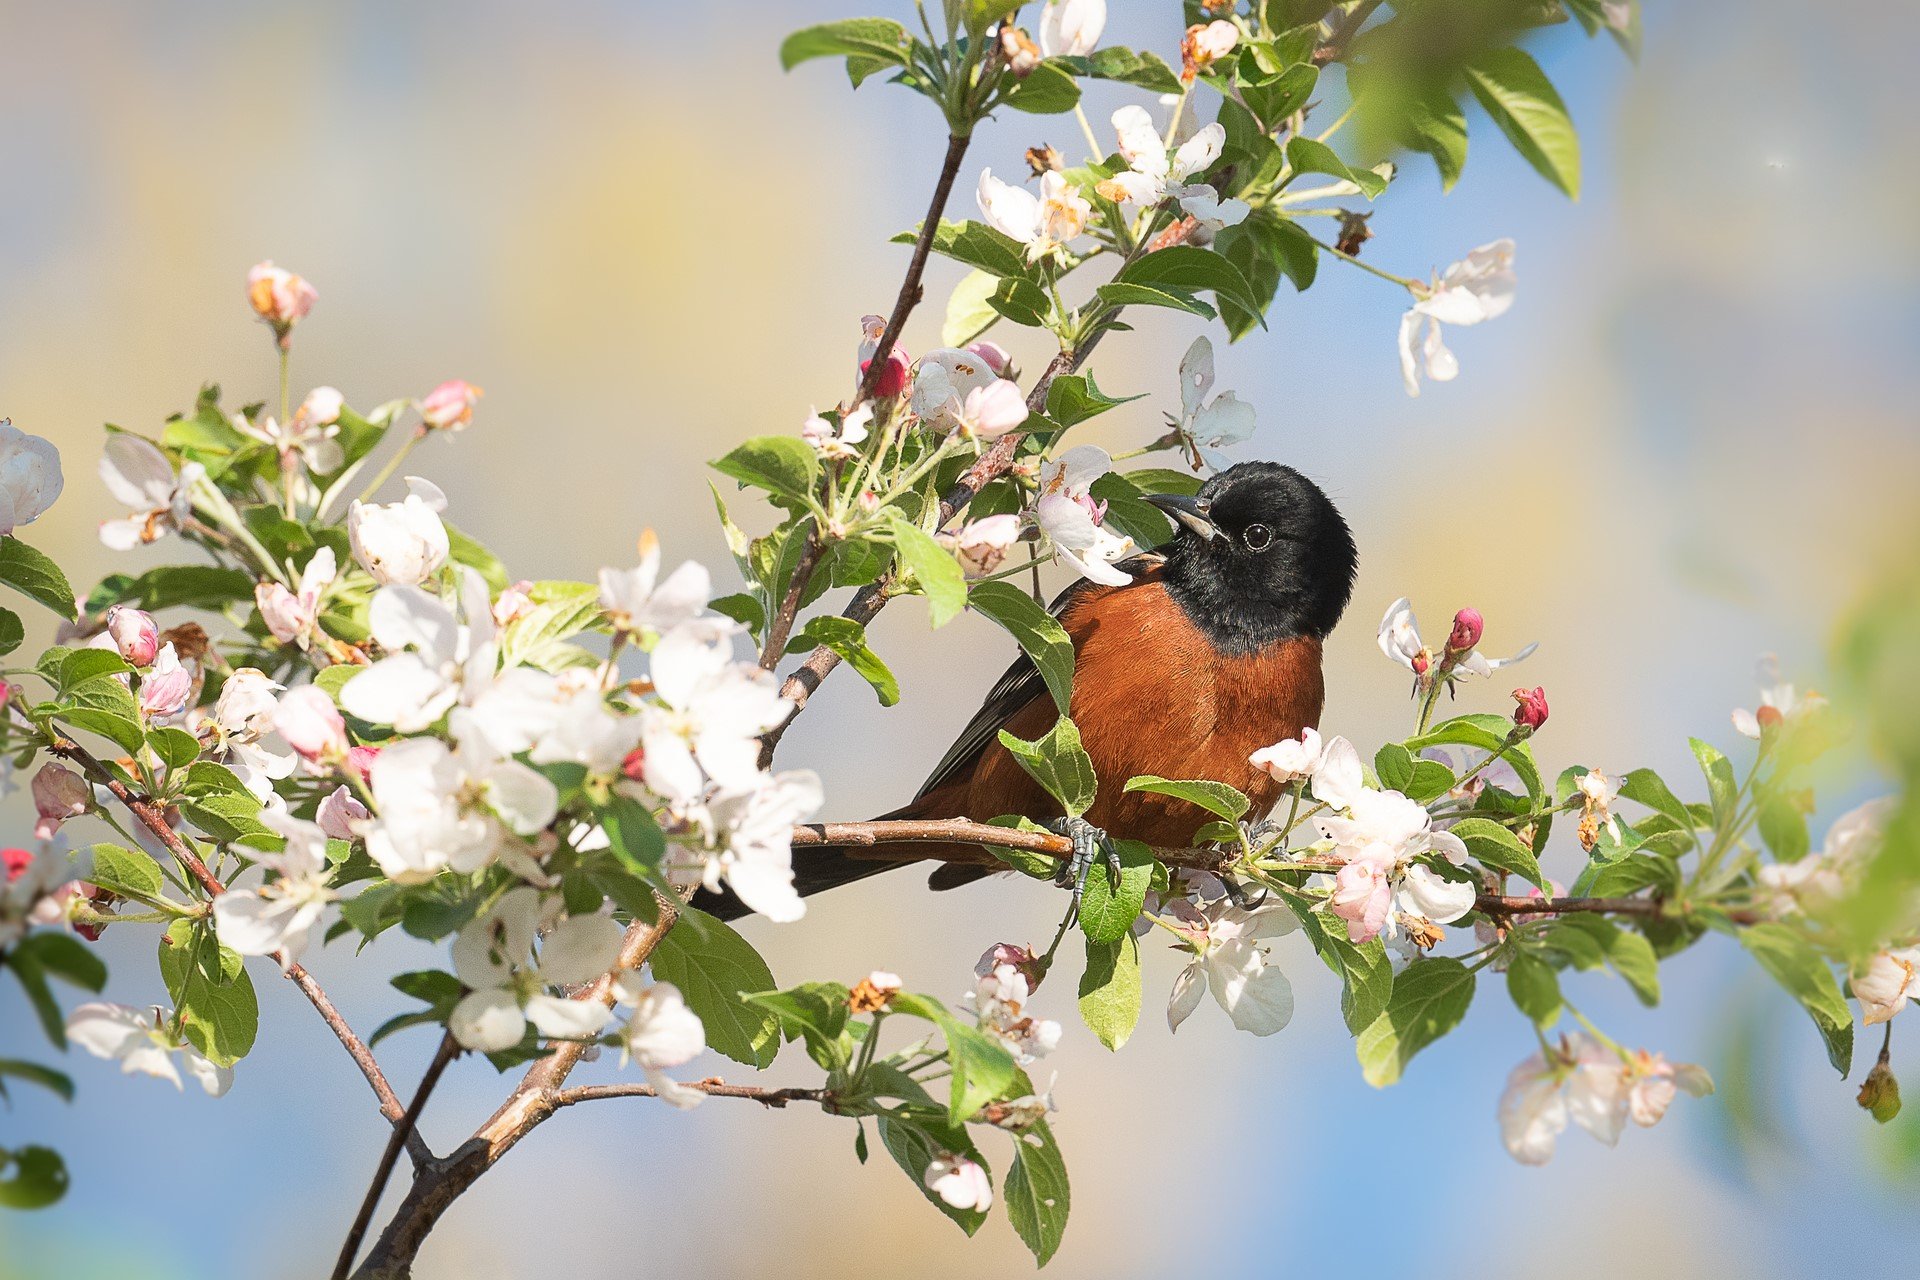 Orchard Oriole sitting on branch among flower blossoms